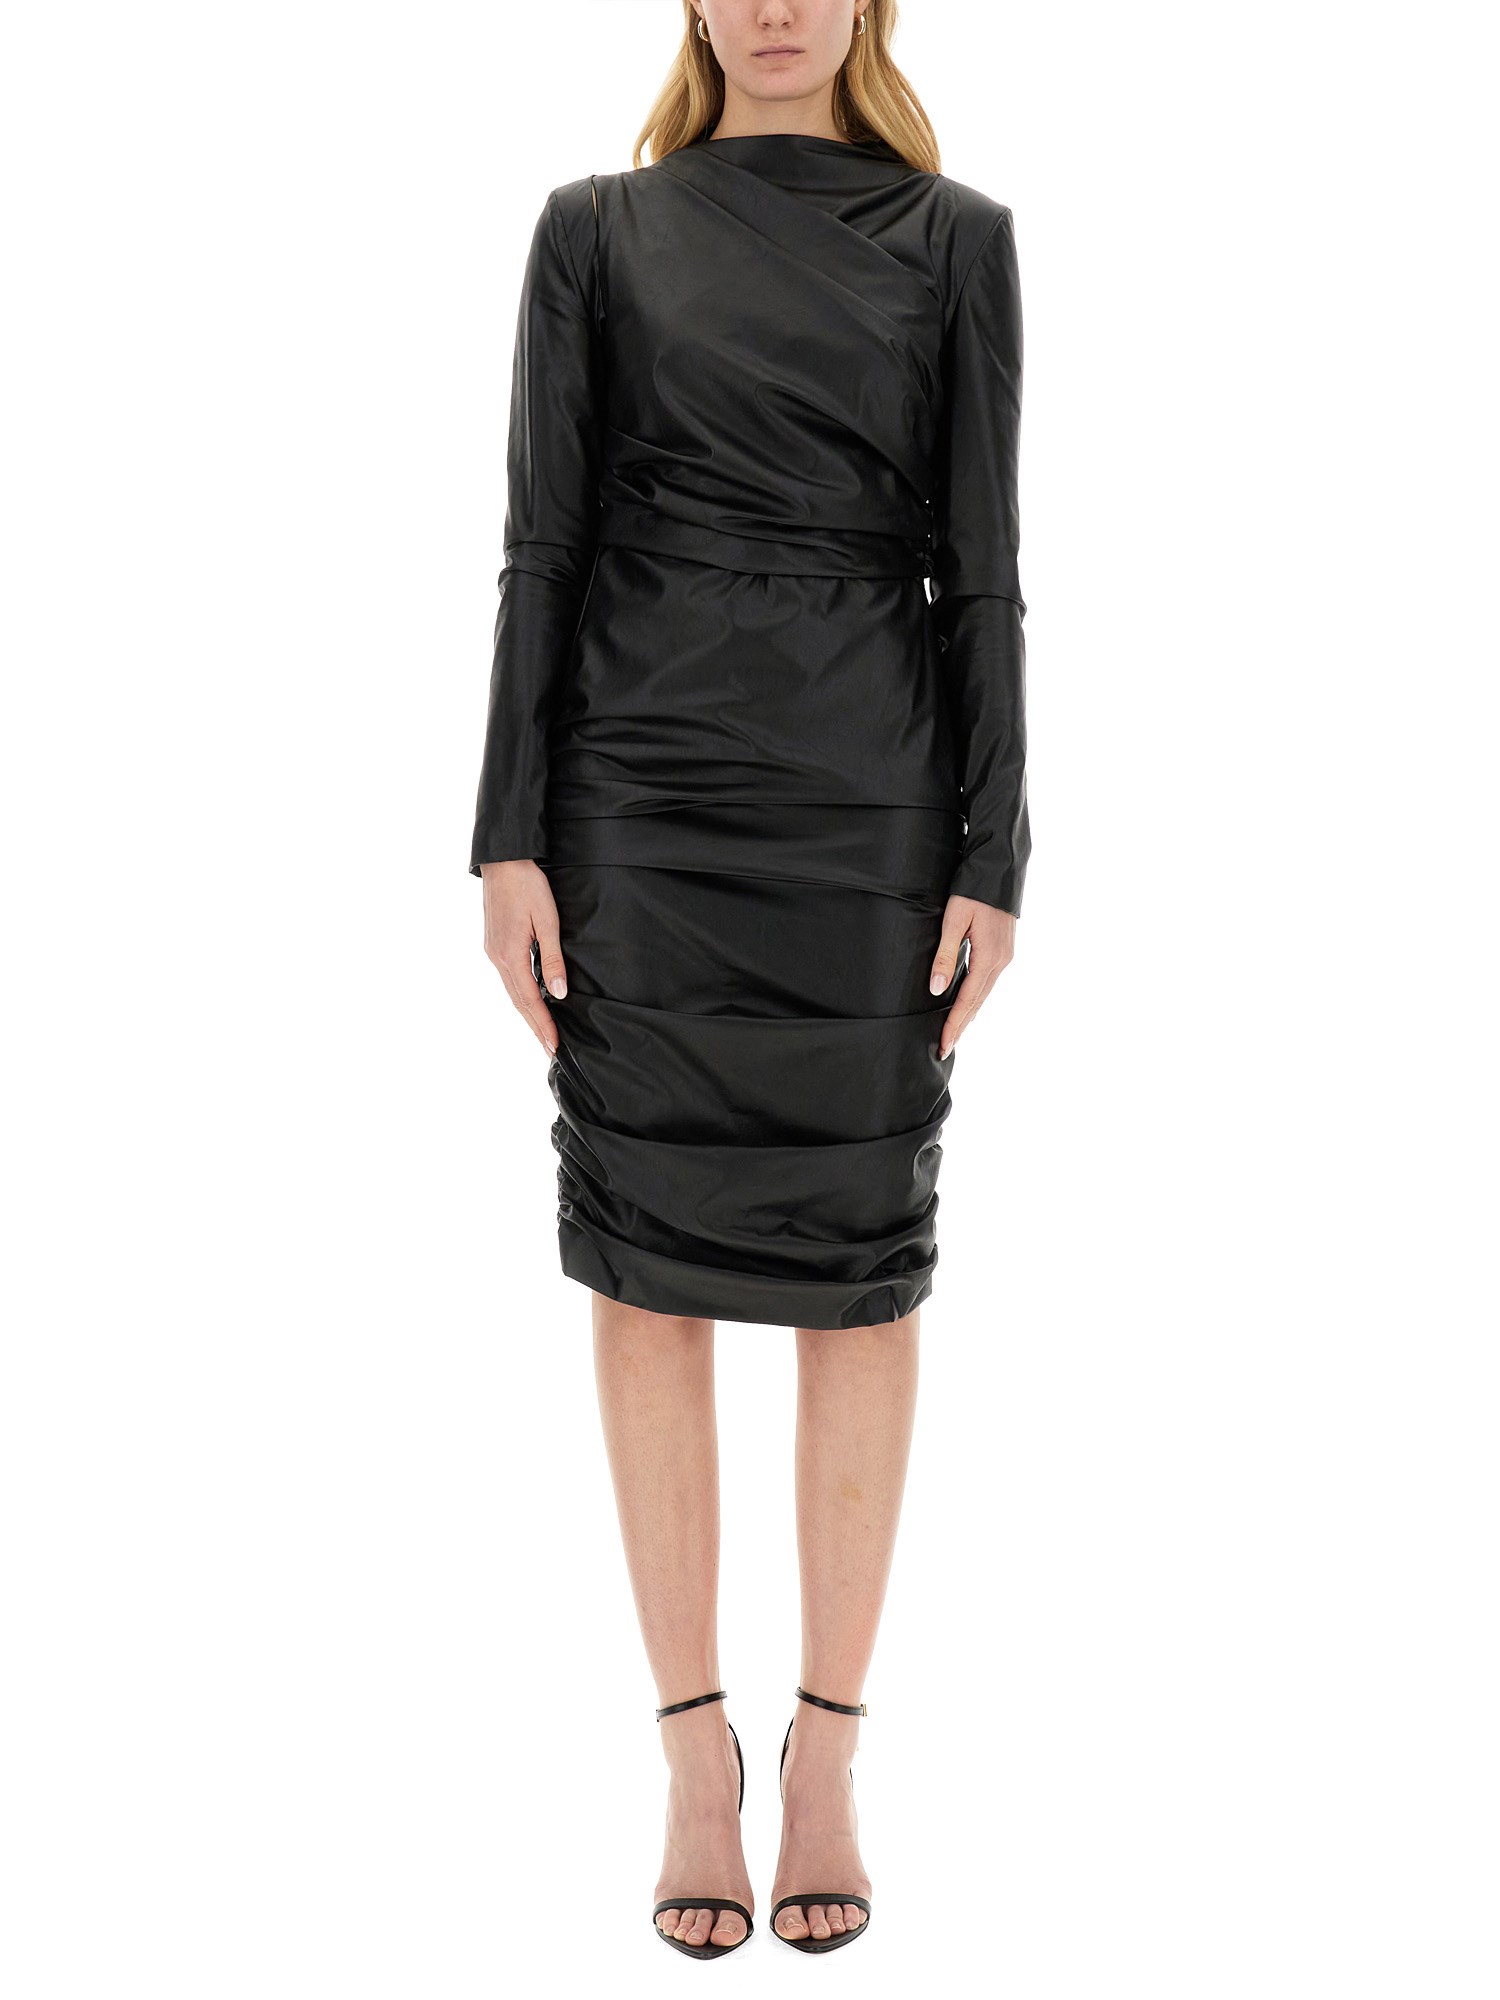 tom ford ruched dress